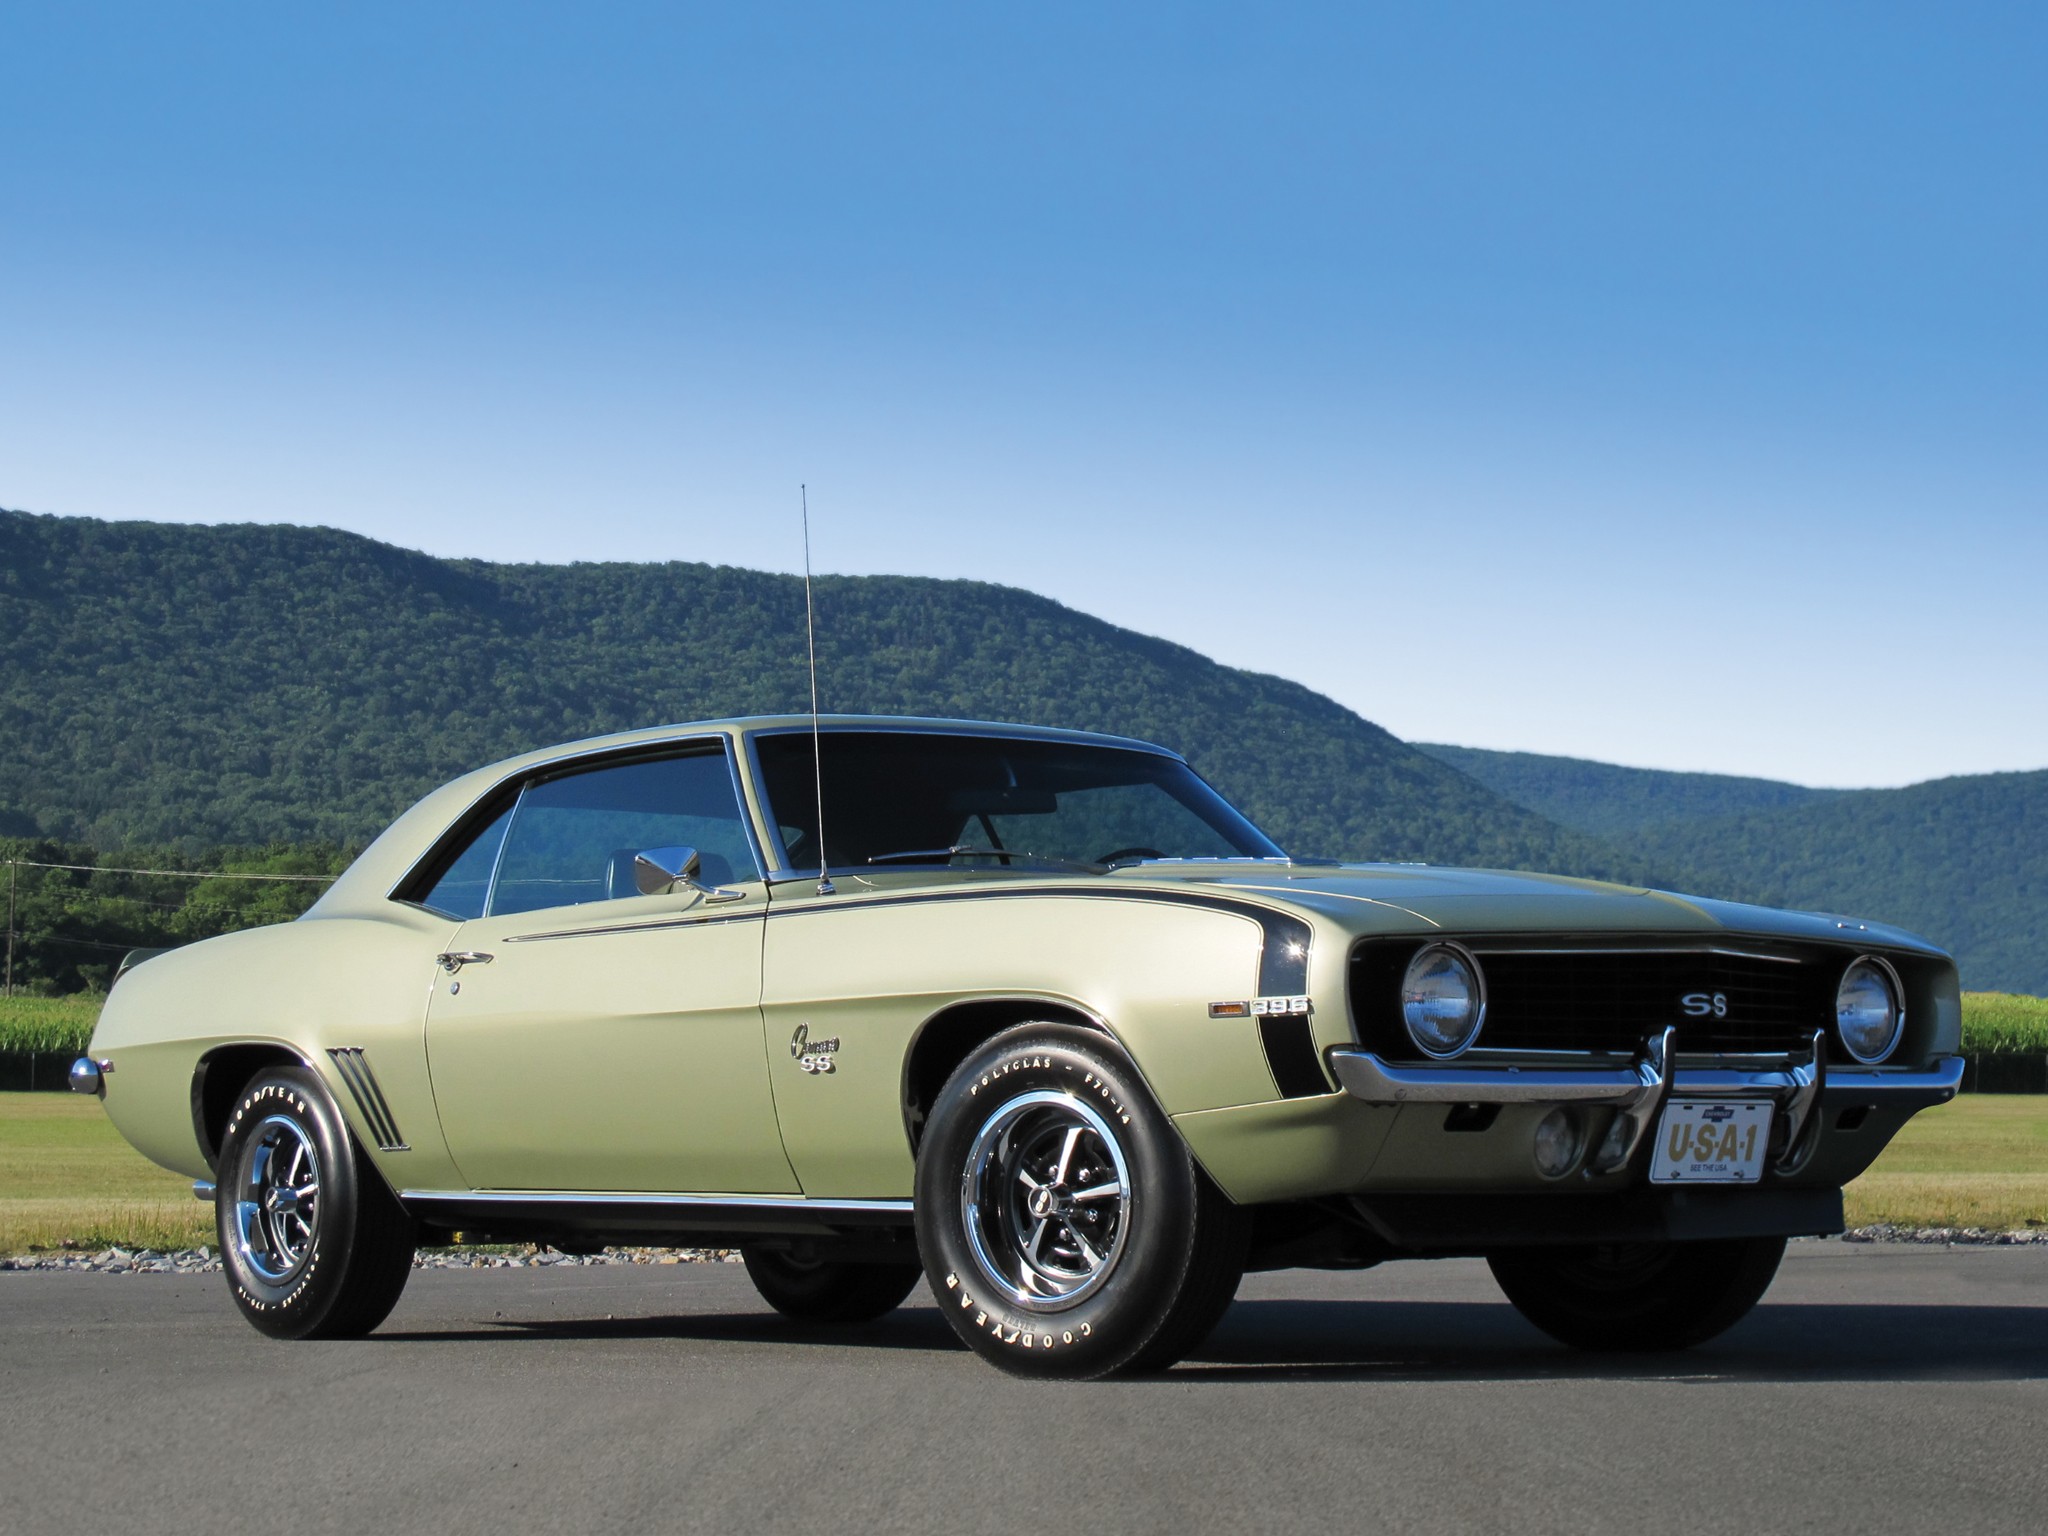 Chevrolet Camaro SS Wallpapers HD Download 2048x1536